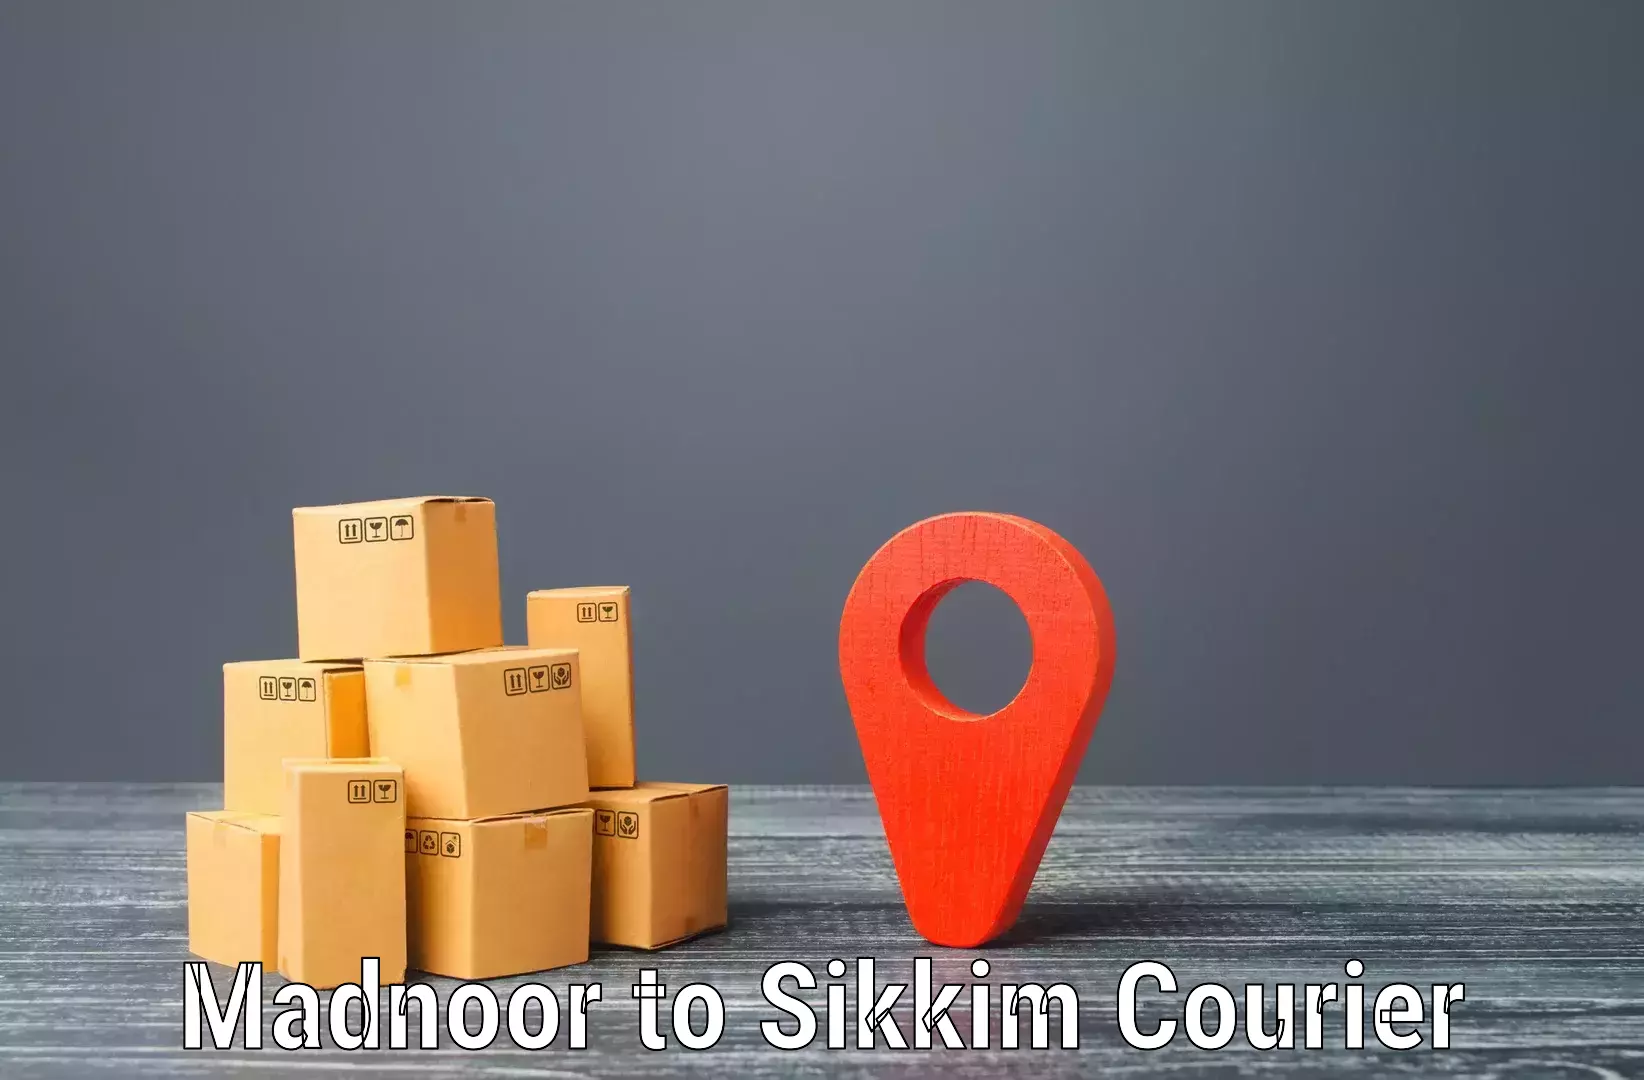 Supply chain efficiency Madnoor to South Sikkim